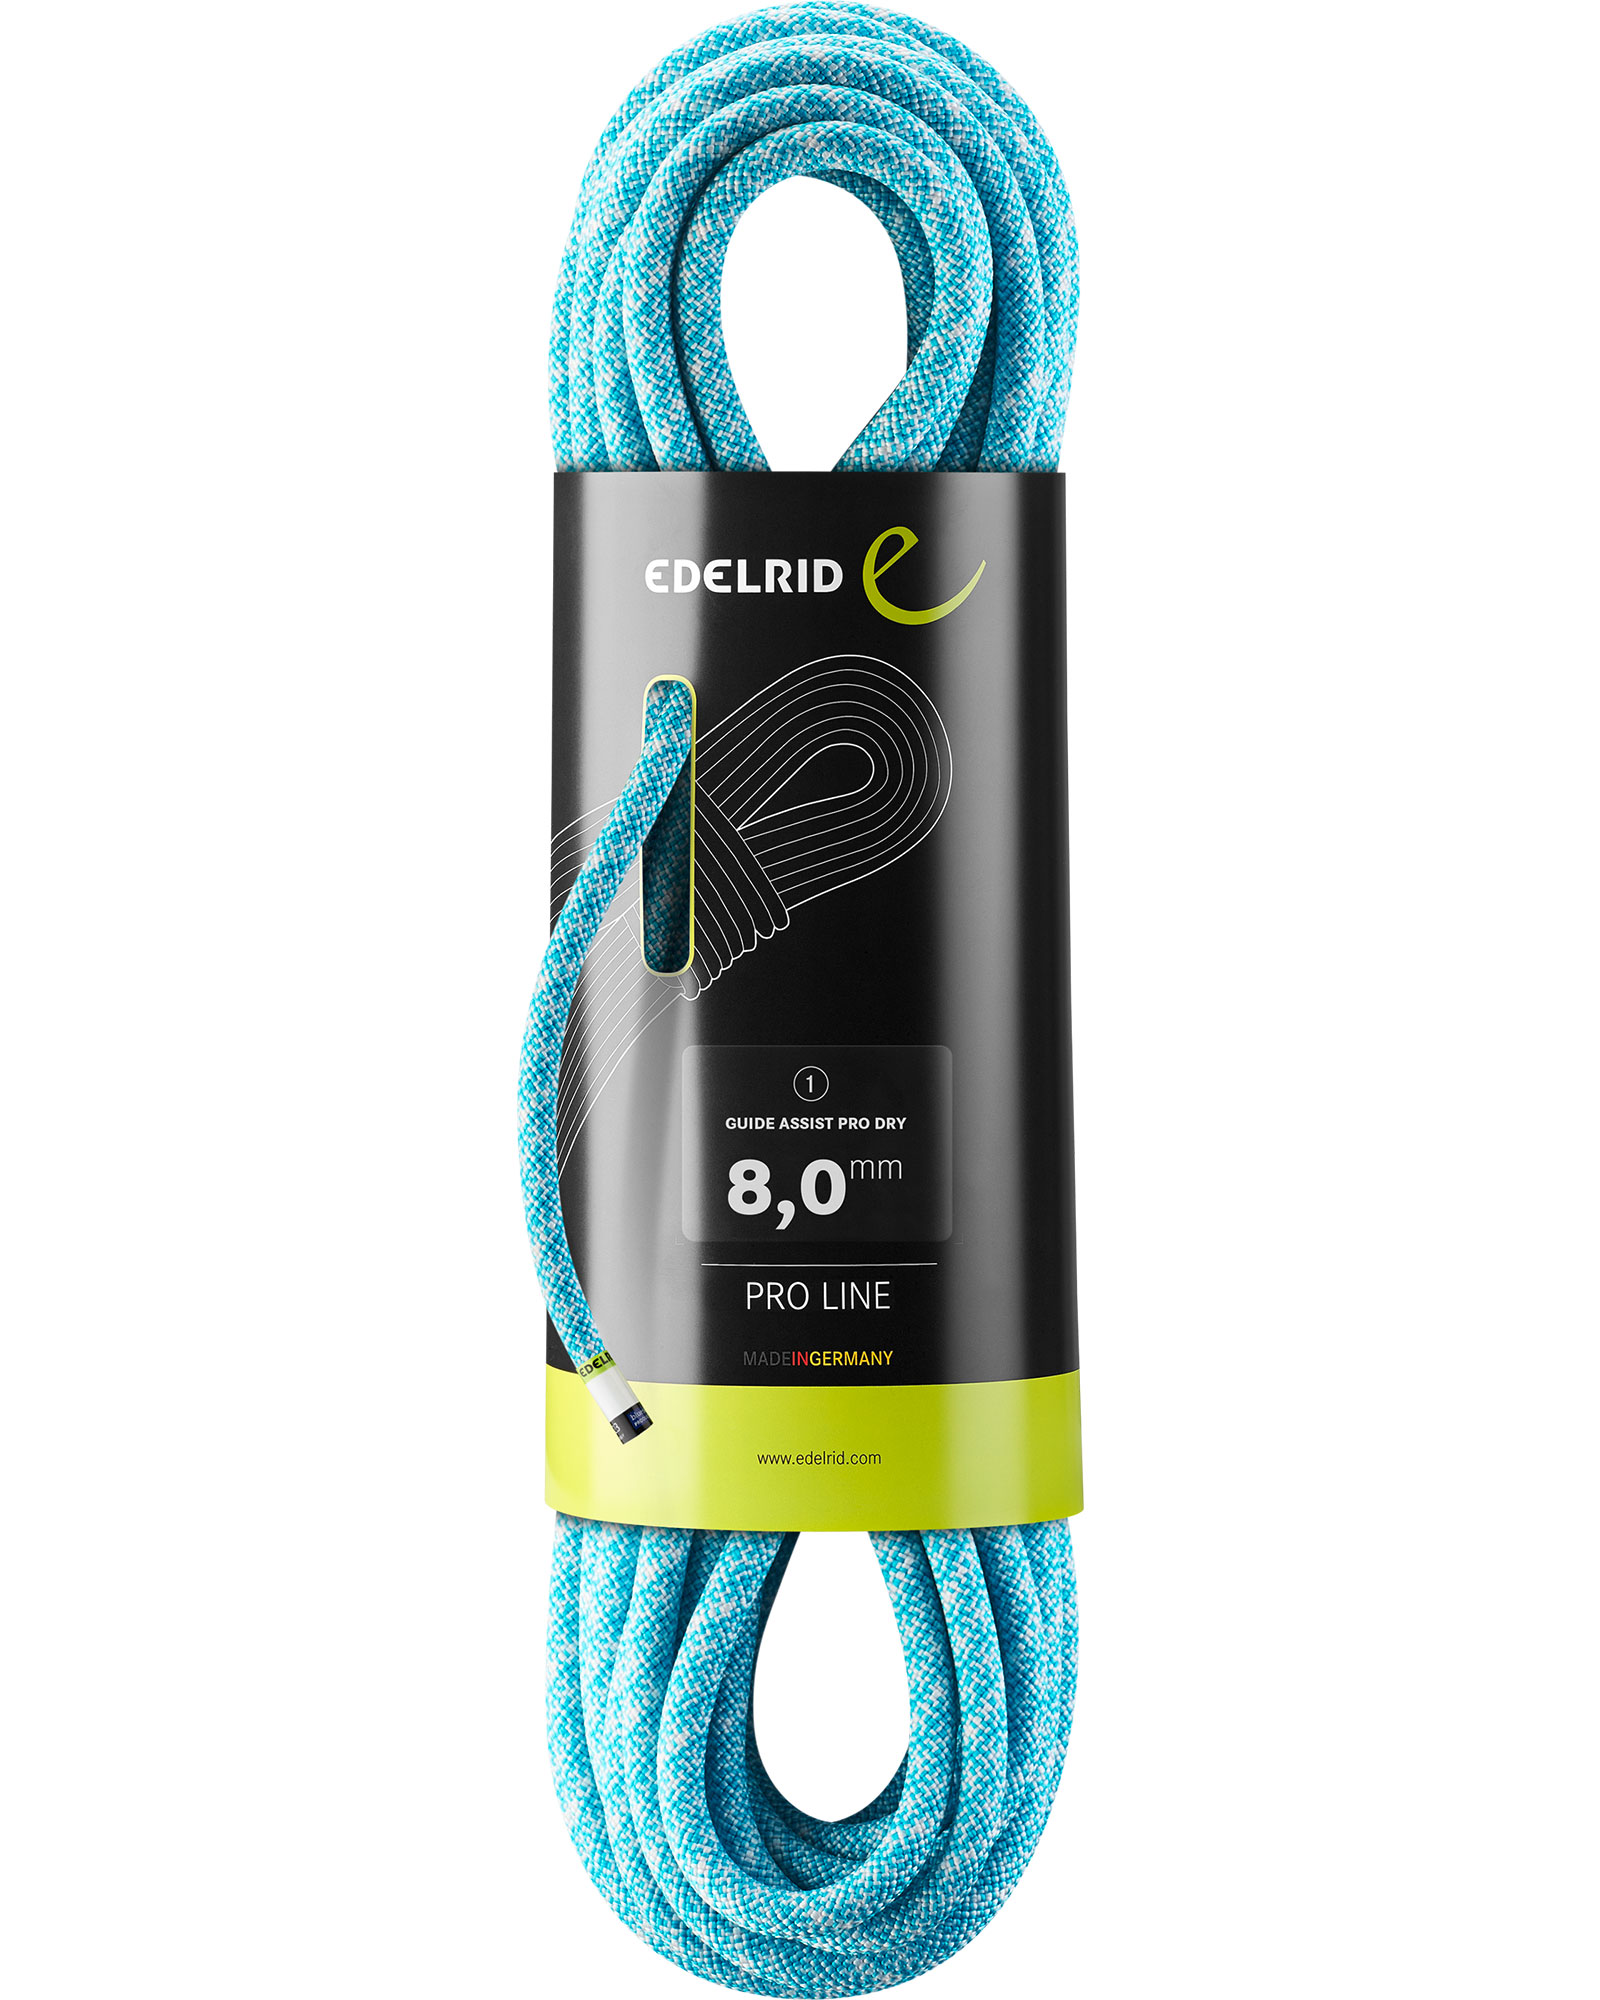 Edelrid Guide Assist Pro Dry 8.0 x 30 Rope 0